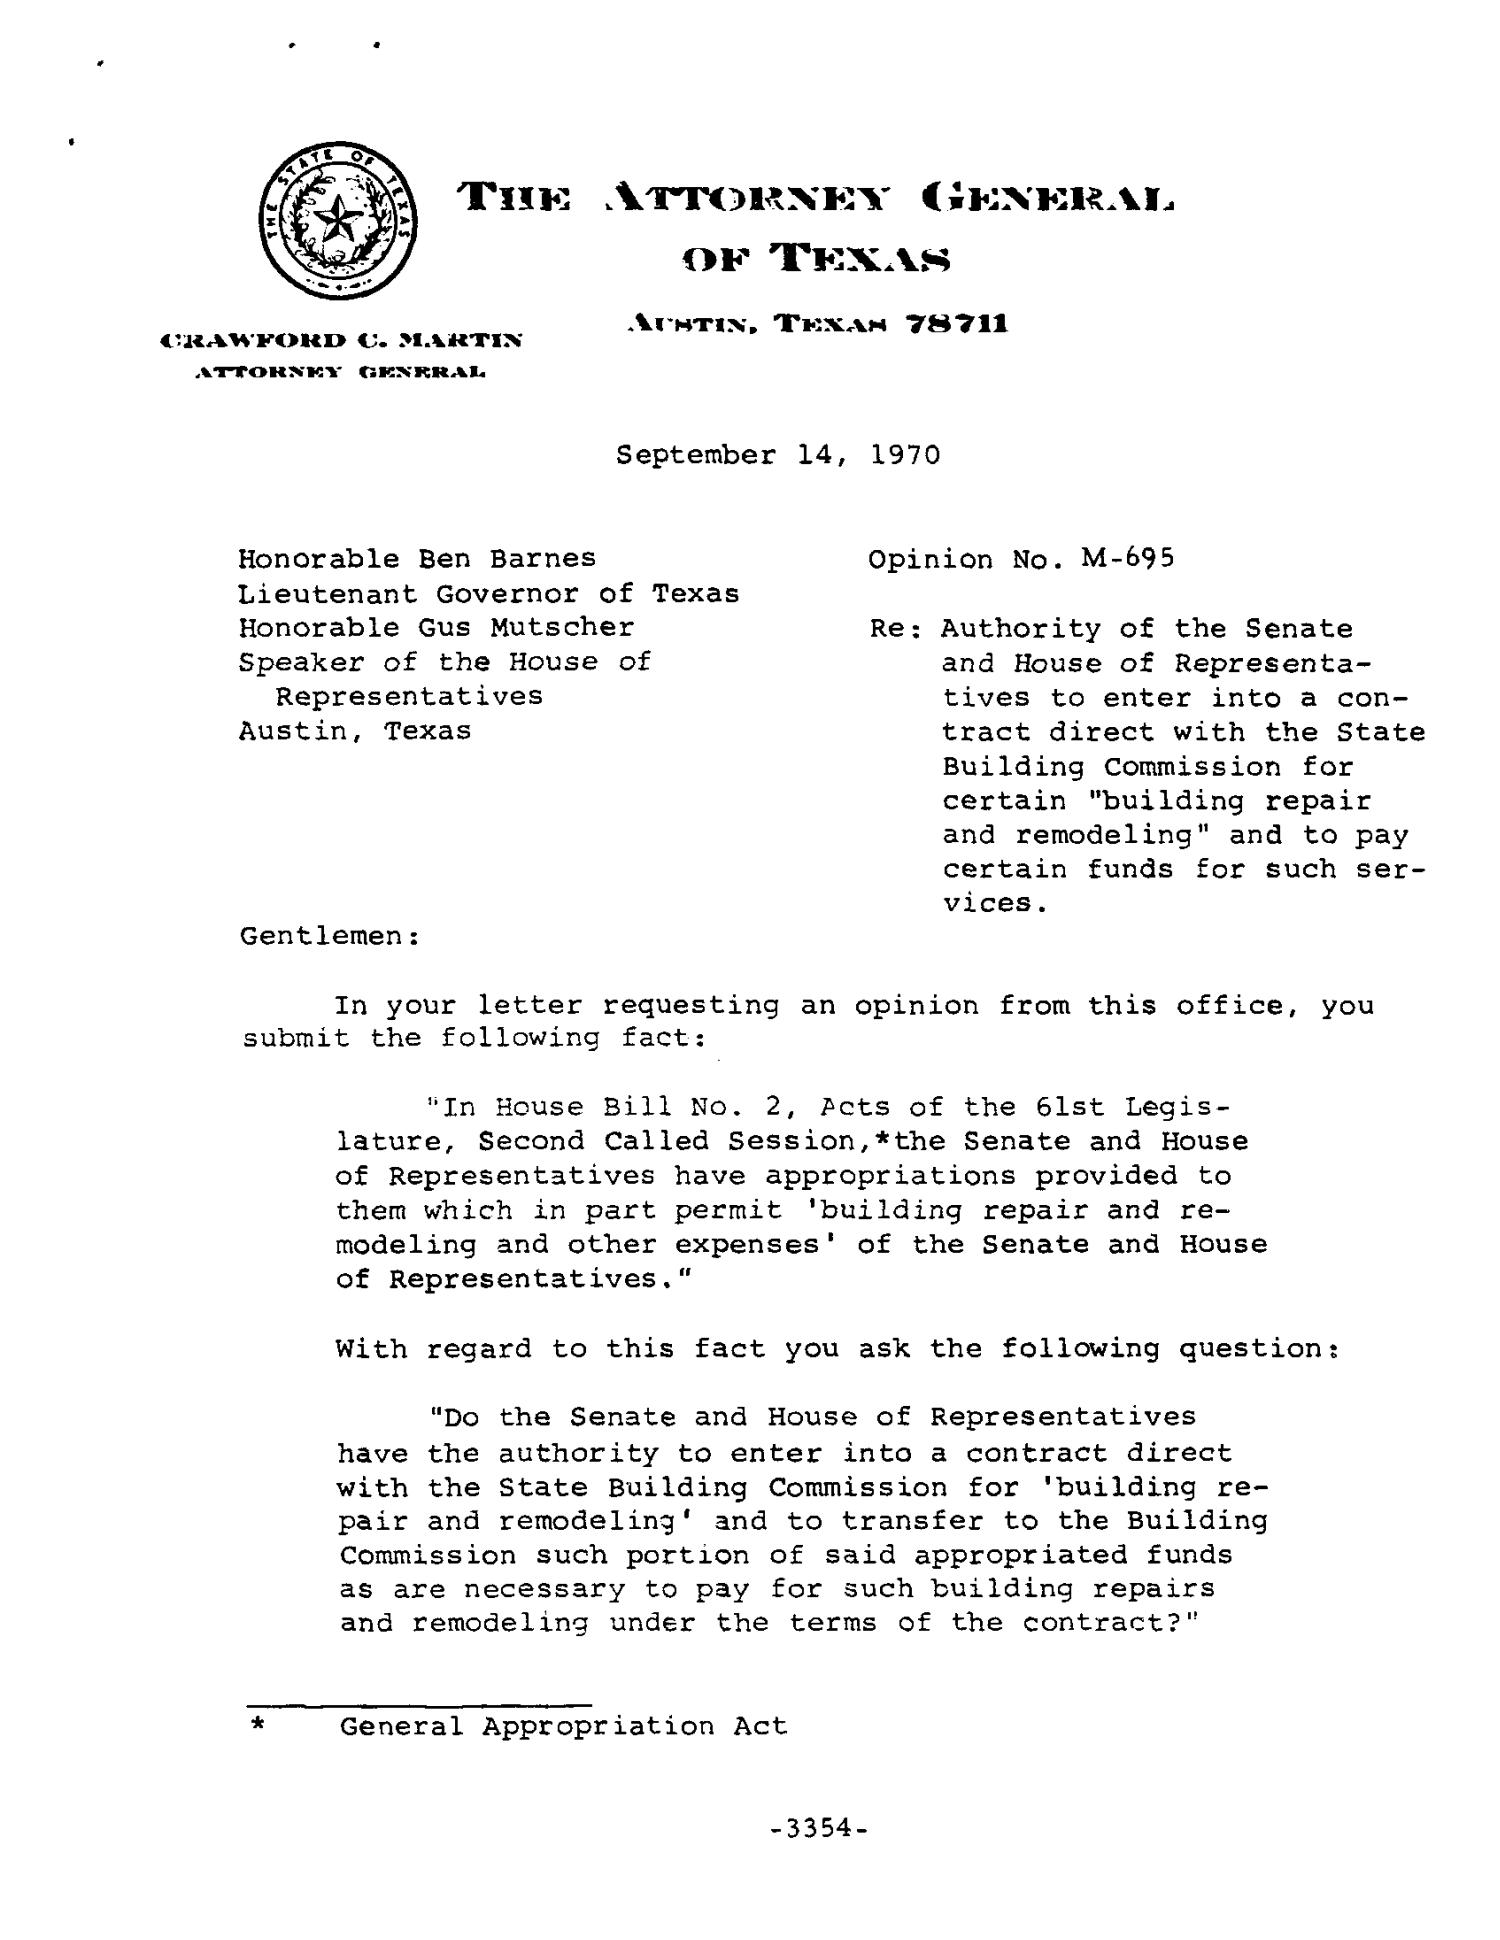 Texas Attorney General Opinion: M-695
                                                
                                                    [Sequence #]: 1 of 9
                                                